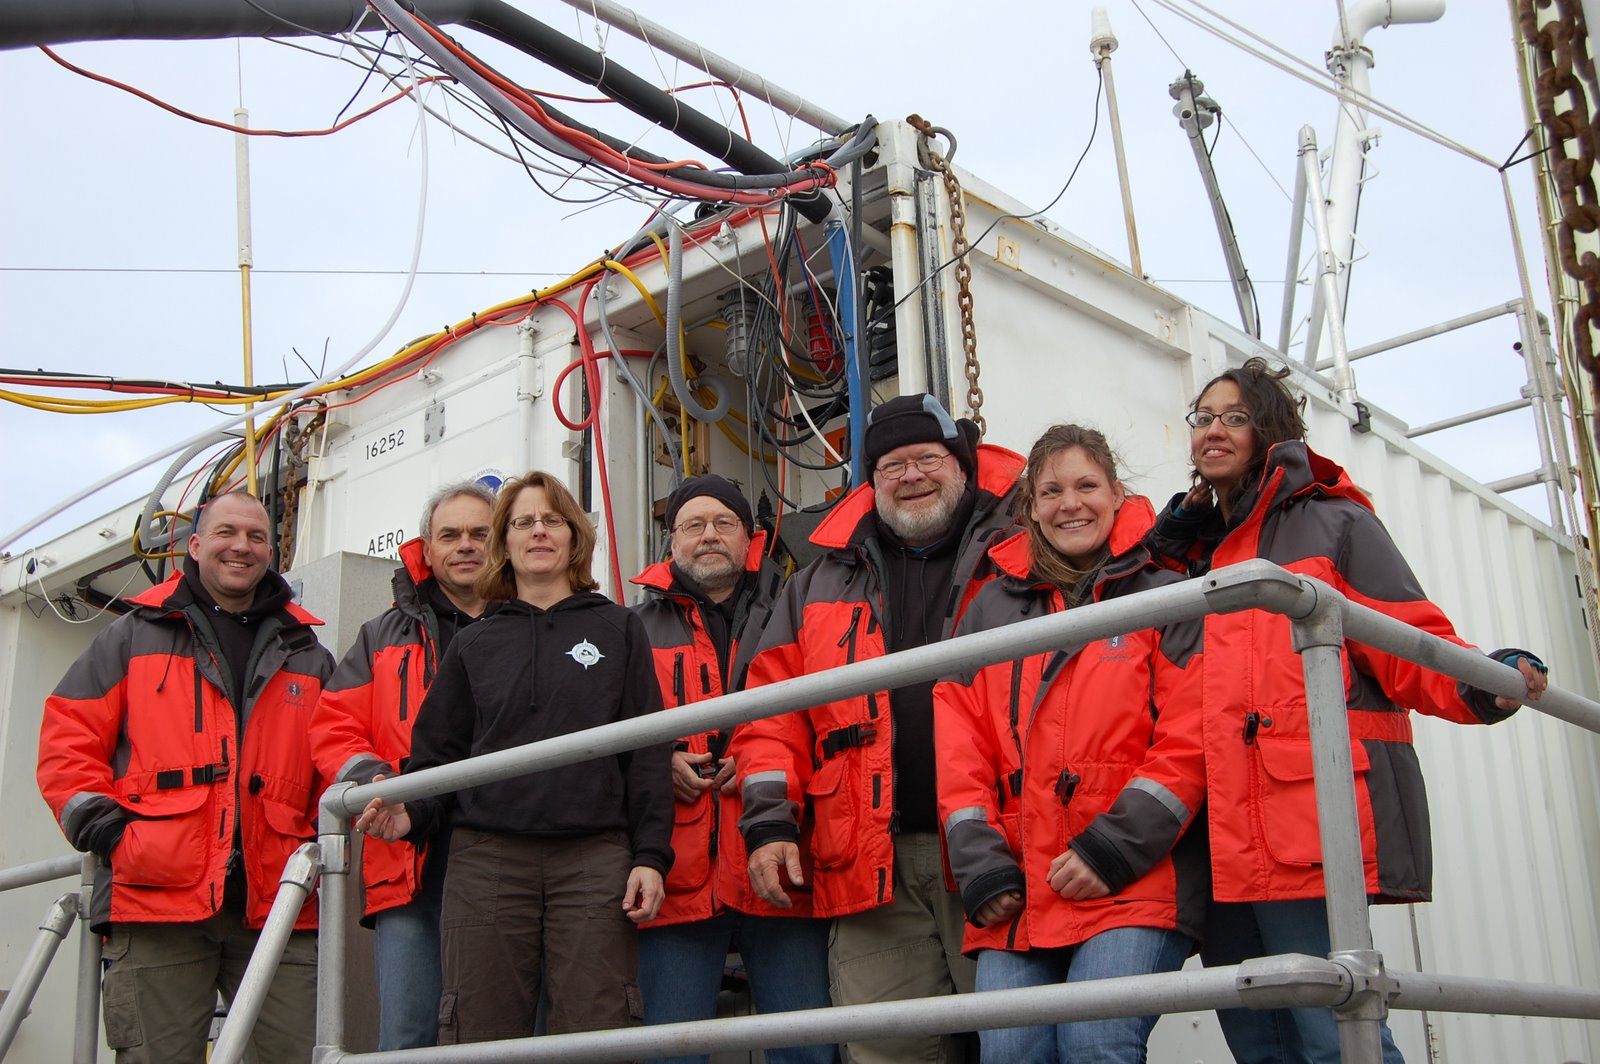 Onboard the R/V Knorr: Chief Scientist Dr. Timothy Bates (second from the left), Dr. Patricia Quinn (third from the left), and Mr. Drew Hamilton (third from the right)